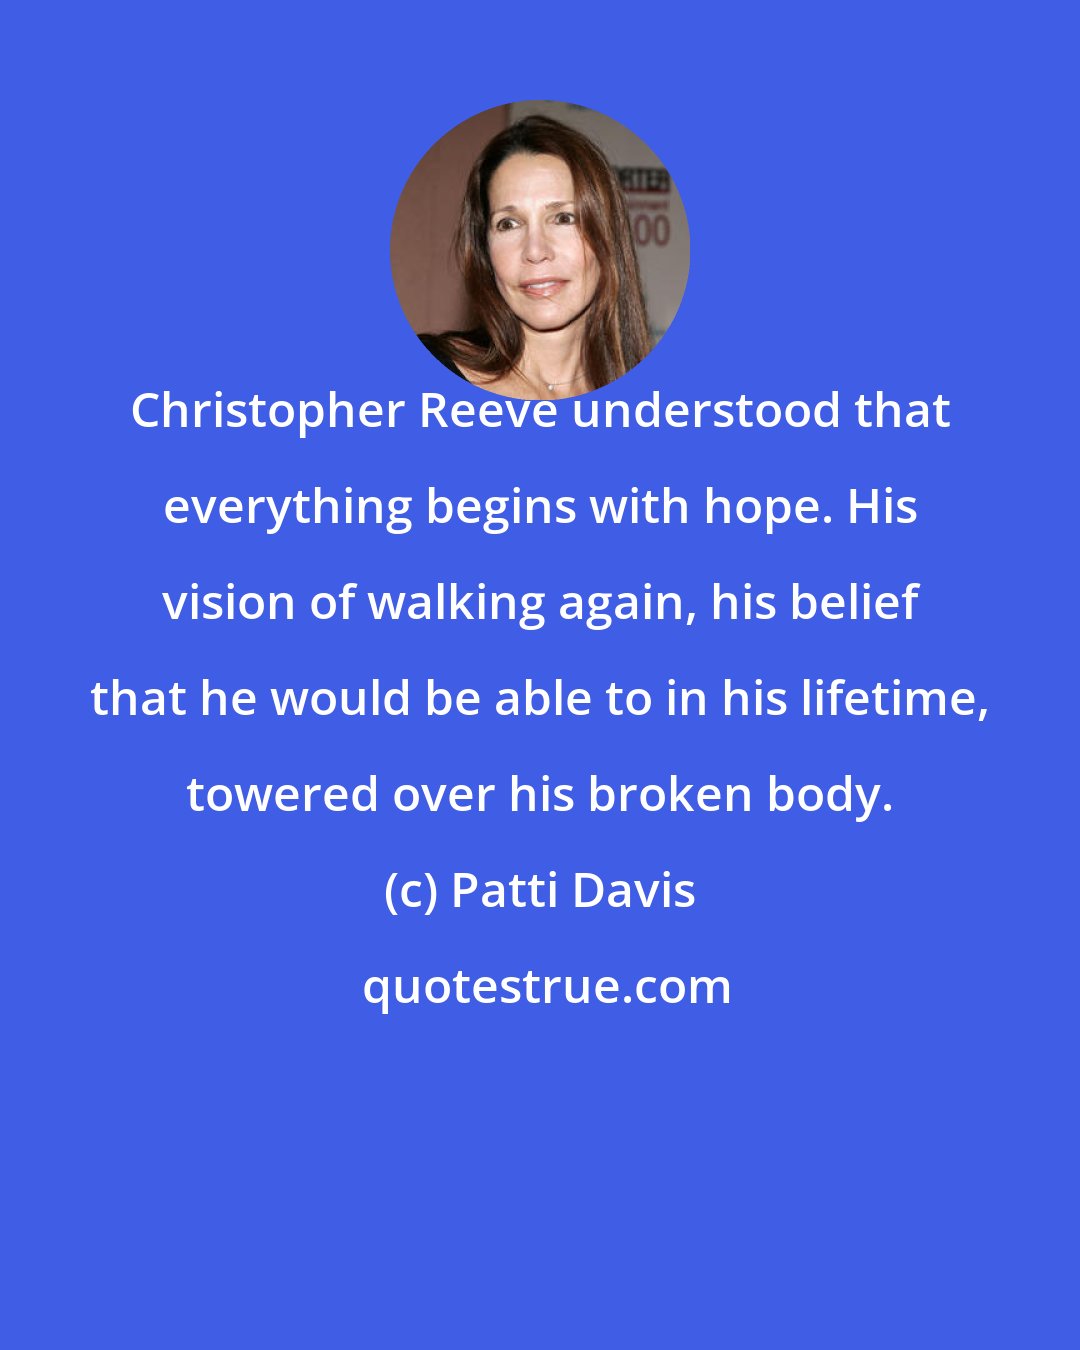 Patti Davis: Christopher Reeve understood that everything begins with hope. His vision of walking again, his belief that he would be able to in his lifetime, towered over his broken body.